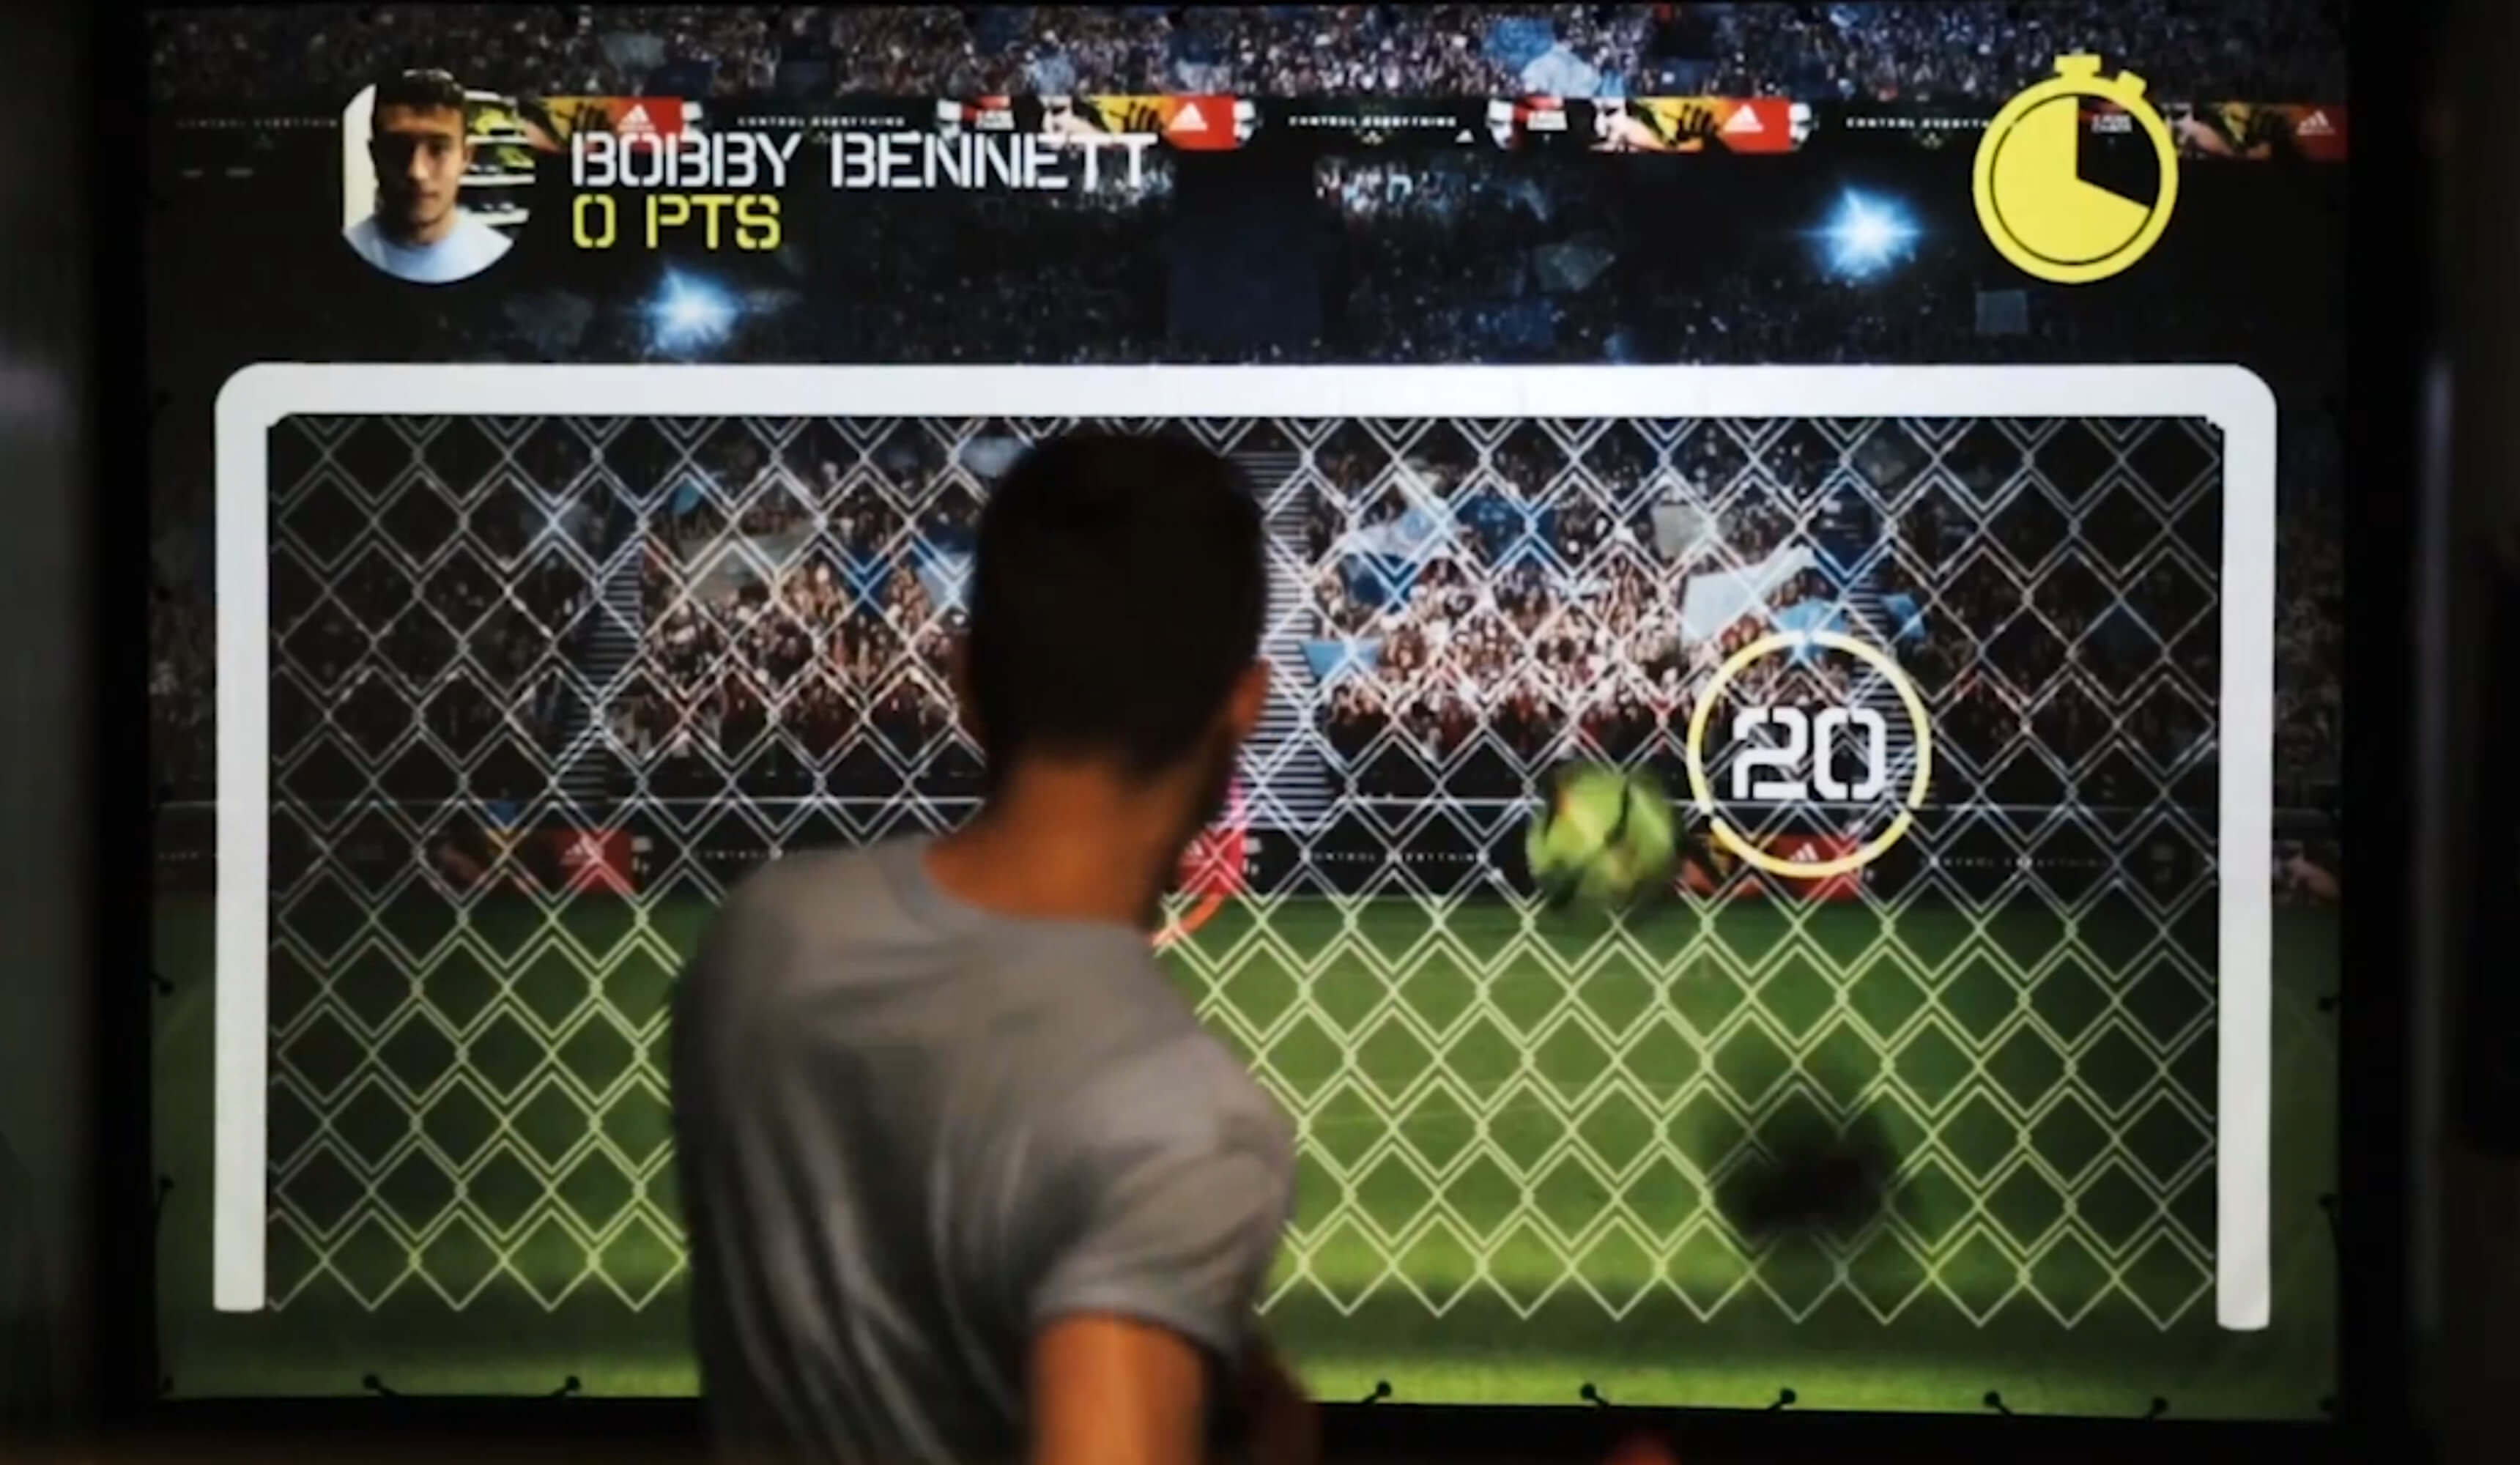 A player kicking the ball against the projected targets in the game area.